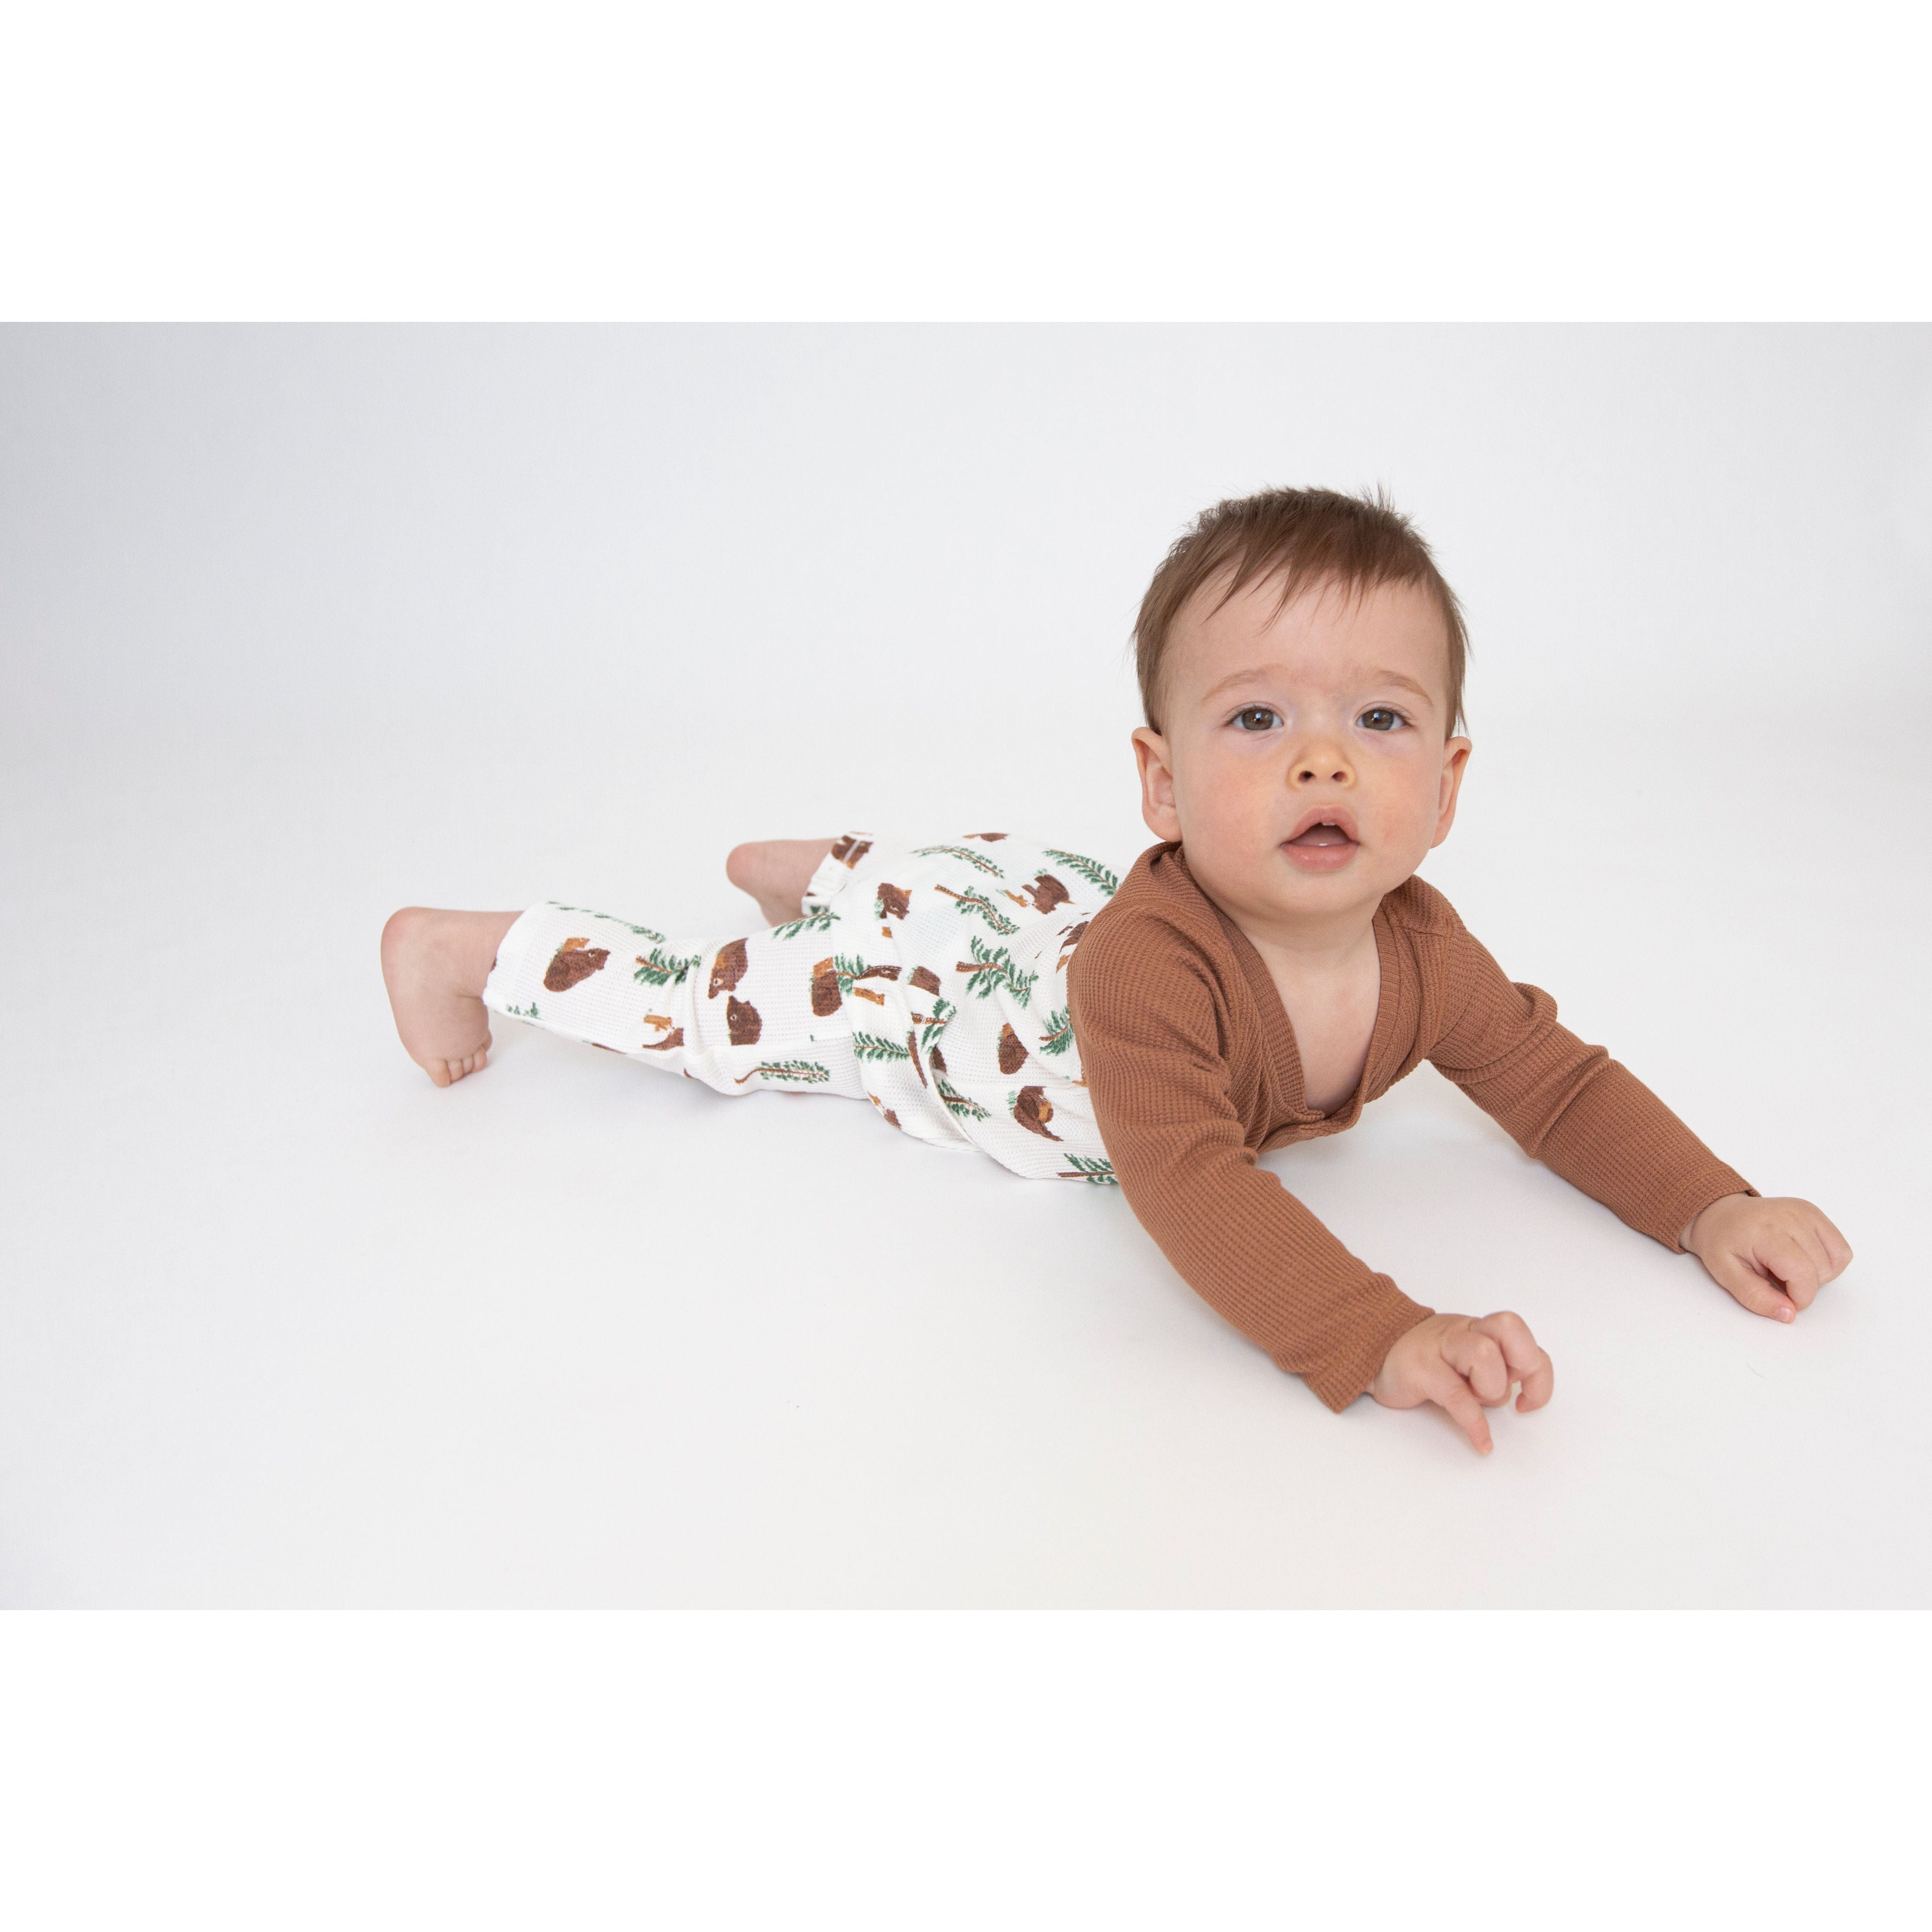 Baby wearing Romper with brown sleeves and collar with a white body with a bear and trees print